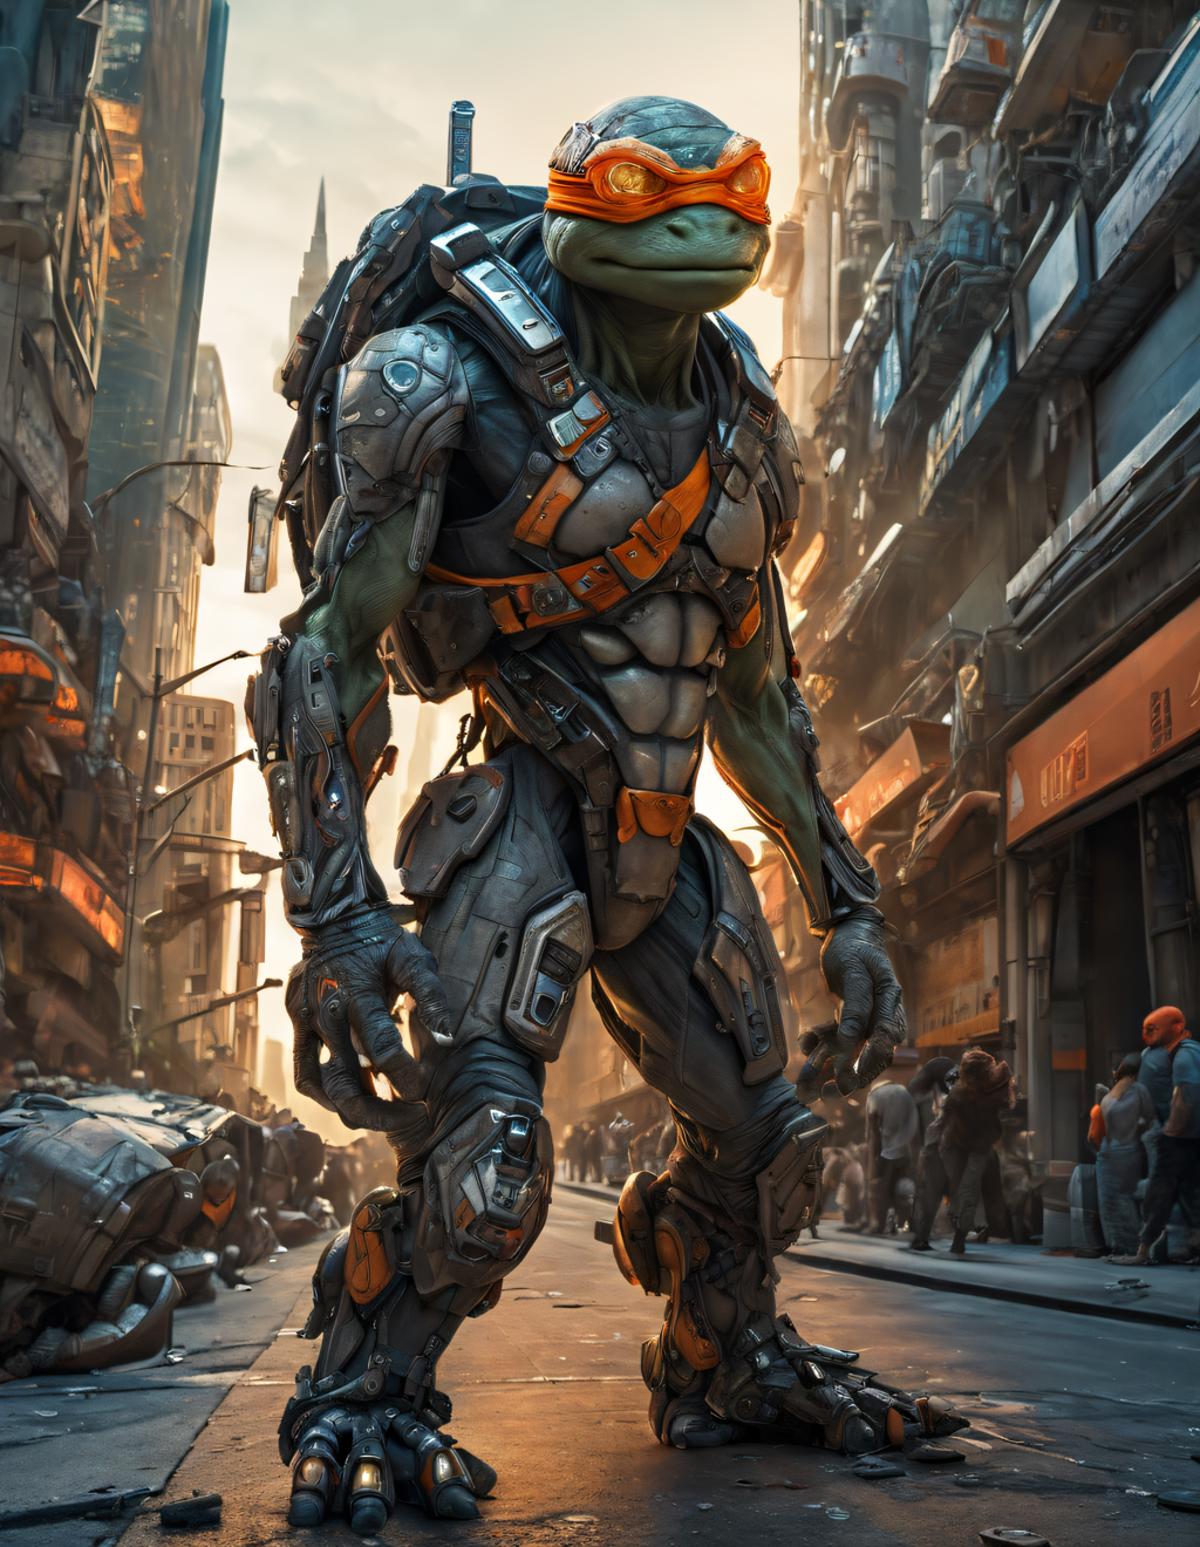 A robot or cyborg wearing a backpack and a frog-like headpiece.